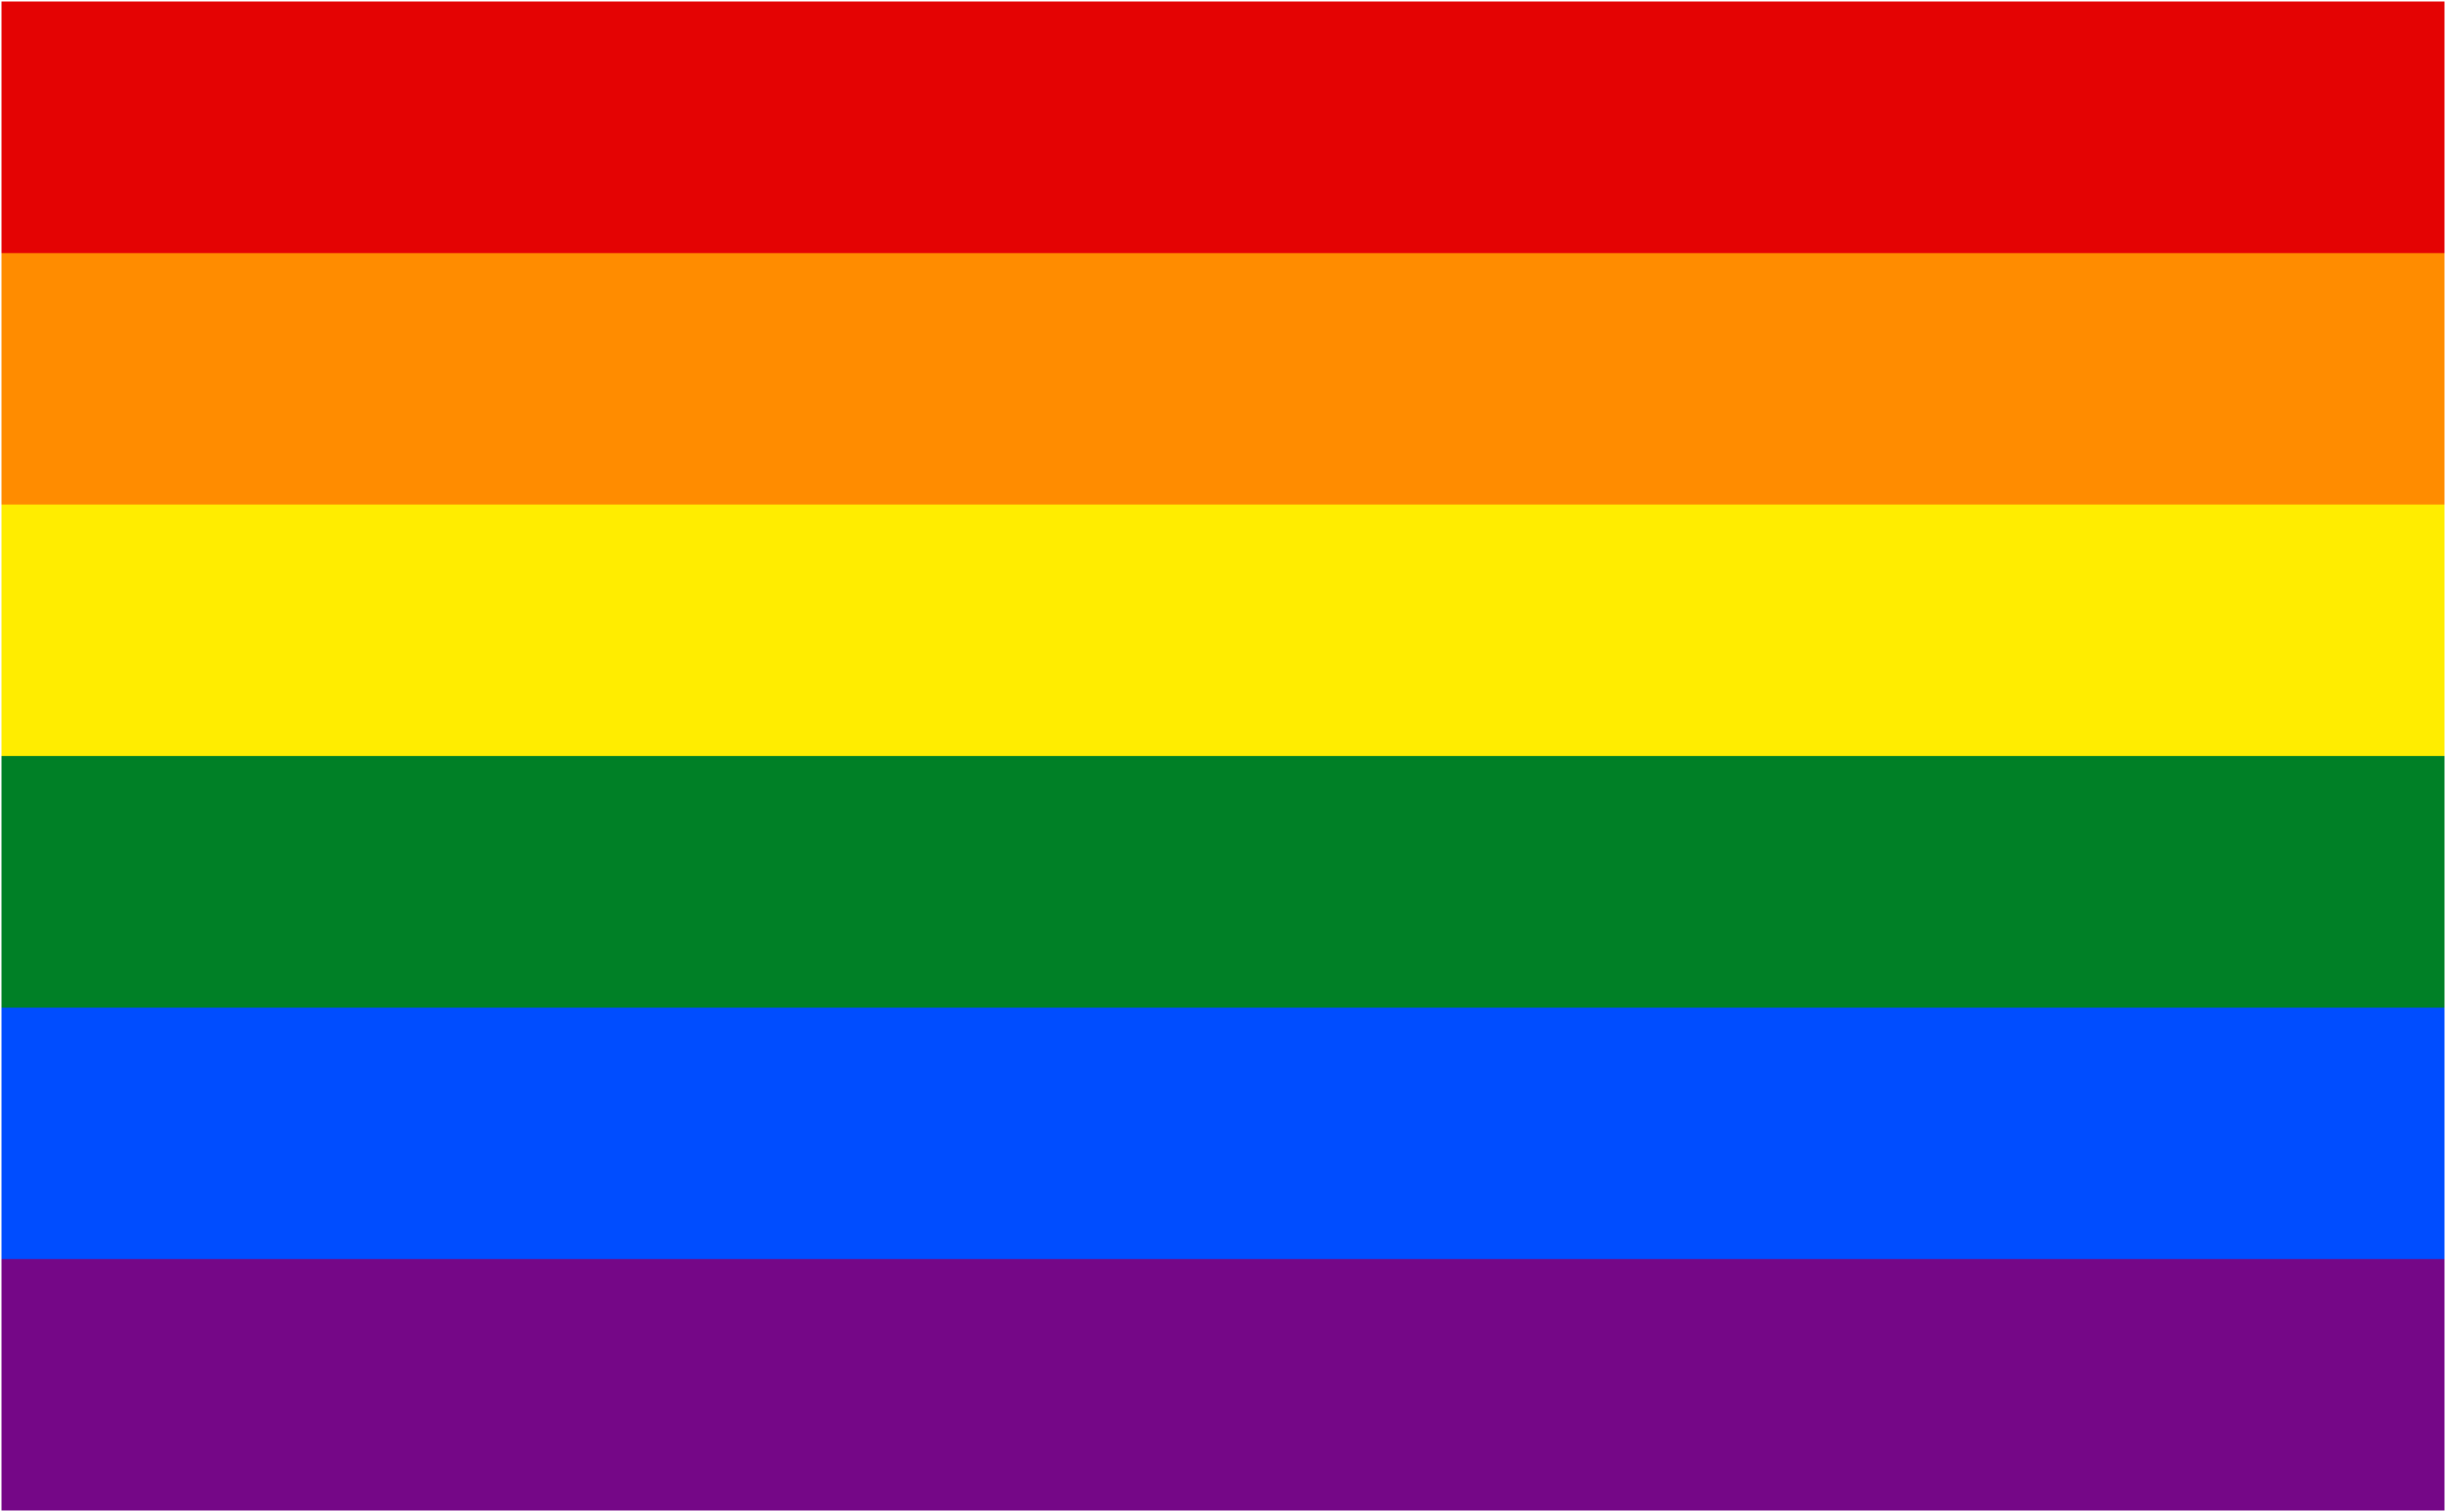 red, orange, yellow, green, blue, and violet flag